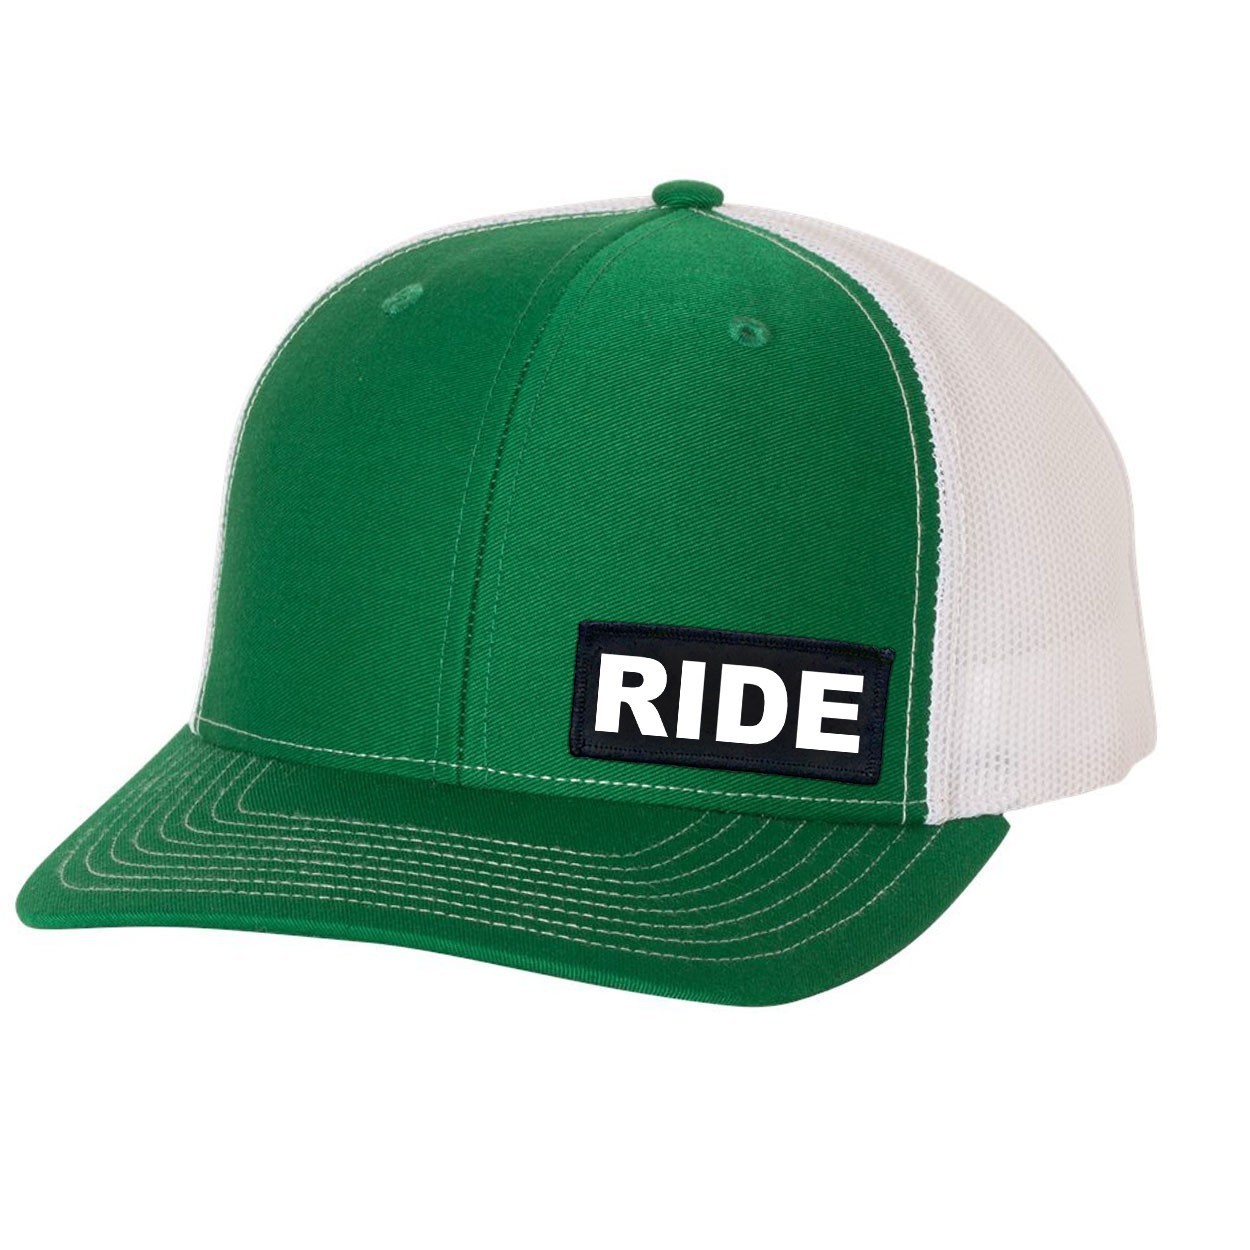 Ride Brand Logo Night Out Woven Patch Snapback Trucker Hat Green/White (White Logo)